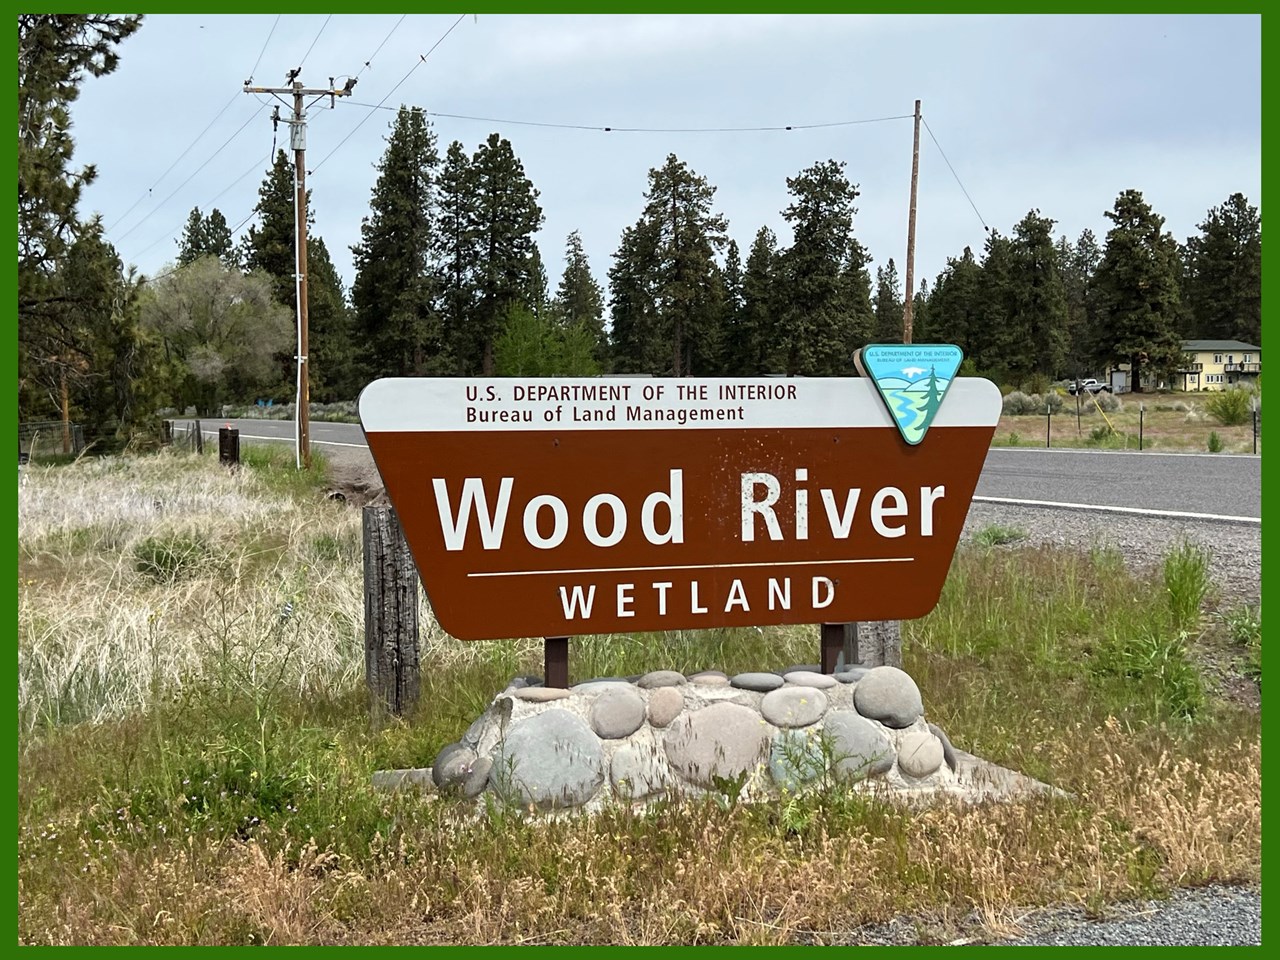 wood river wetlands is just down the road from the property. there is an incredible amount of wildlife here, over 400 species of birds migrate through this area. there are many trails and lookout points in the wetlands to get out and enjoy all that the area has to offer!